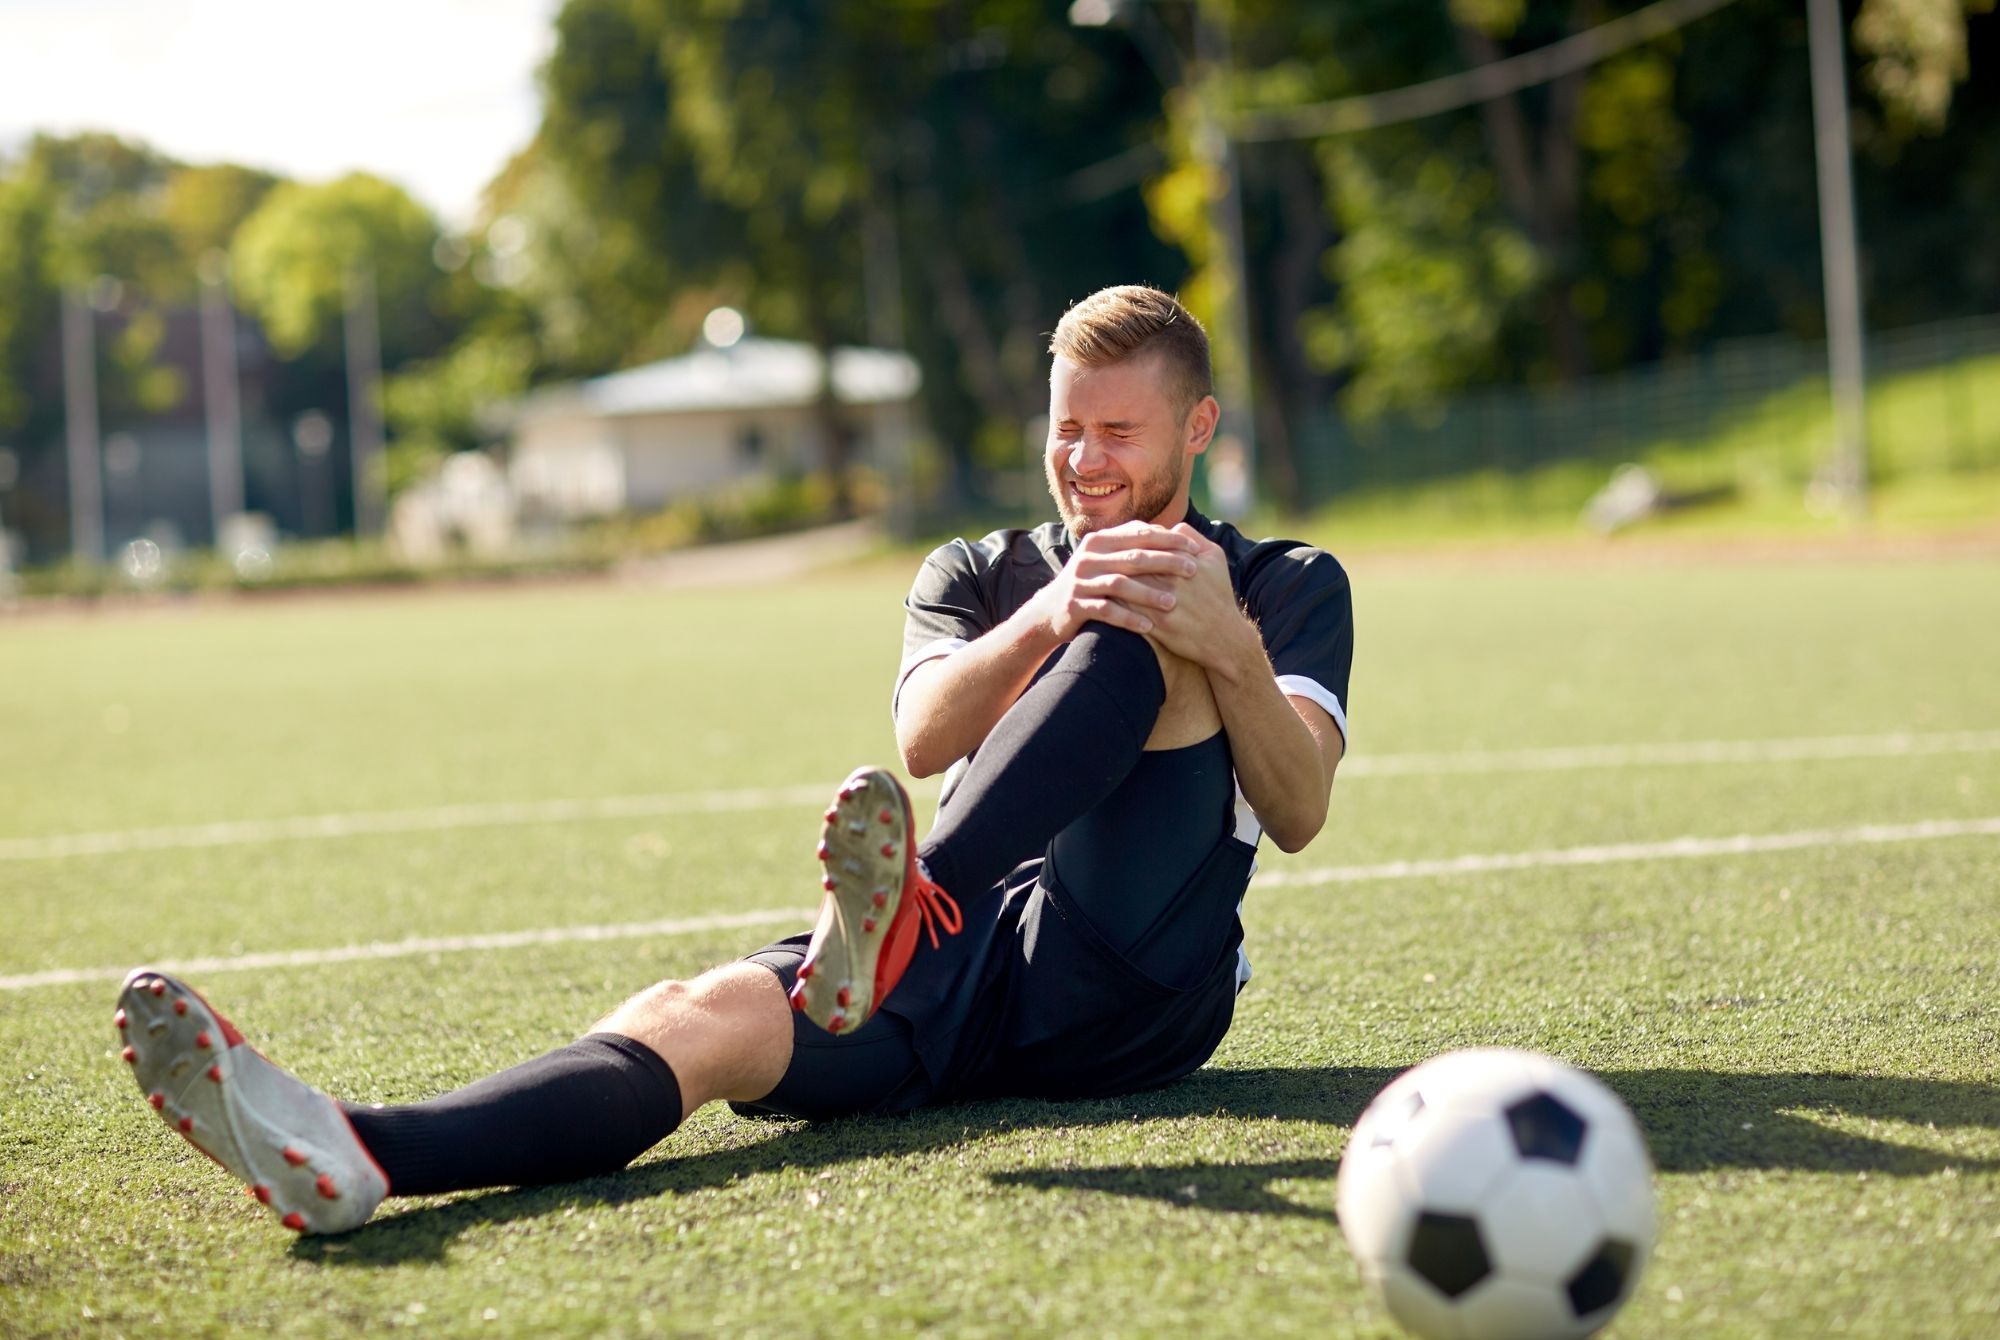 How To Prevent Sports Injuries And Stay Active